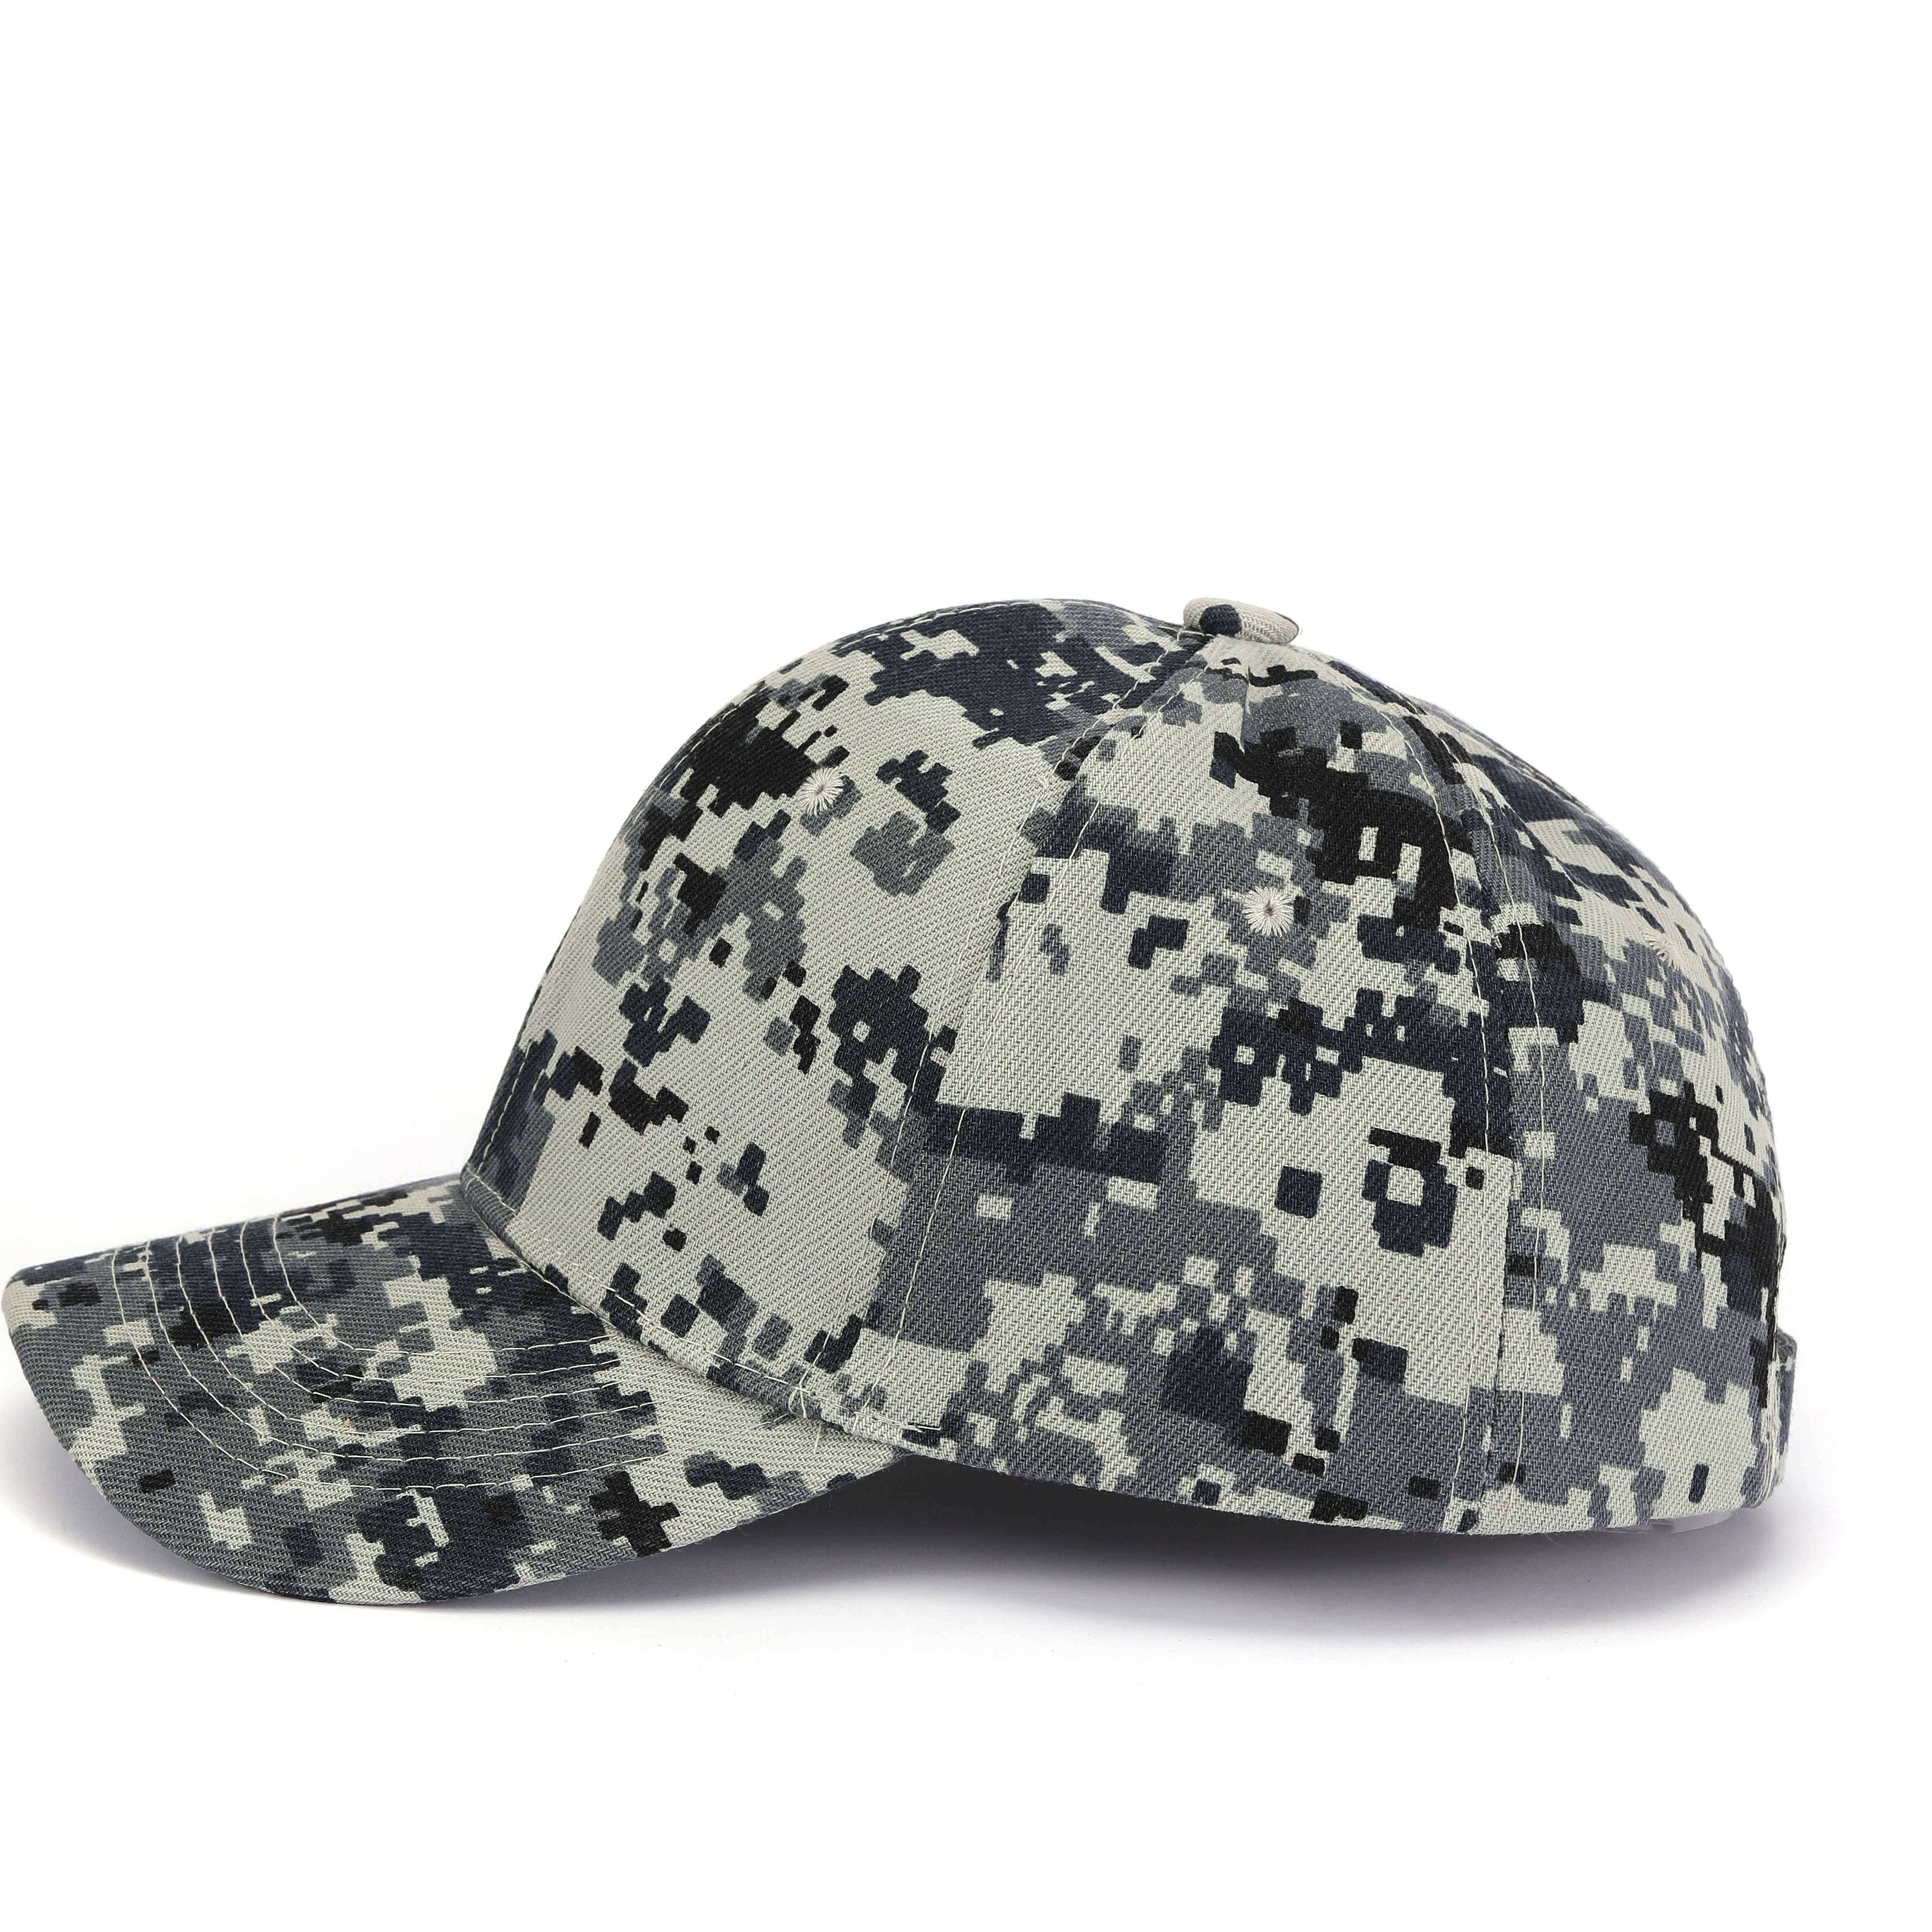 zznysm hat Men's Baseball Cap Caps Camouflage for Men Camouflage Camo Cap  Outdoor Cool Army Military Hunting Hunt Sport Cap for Man